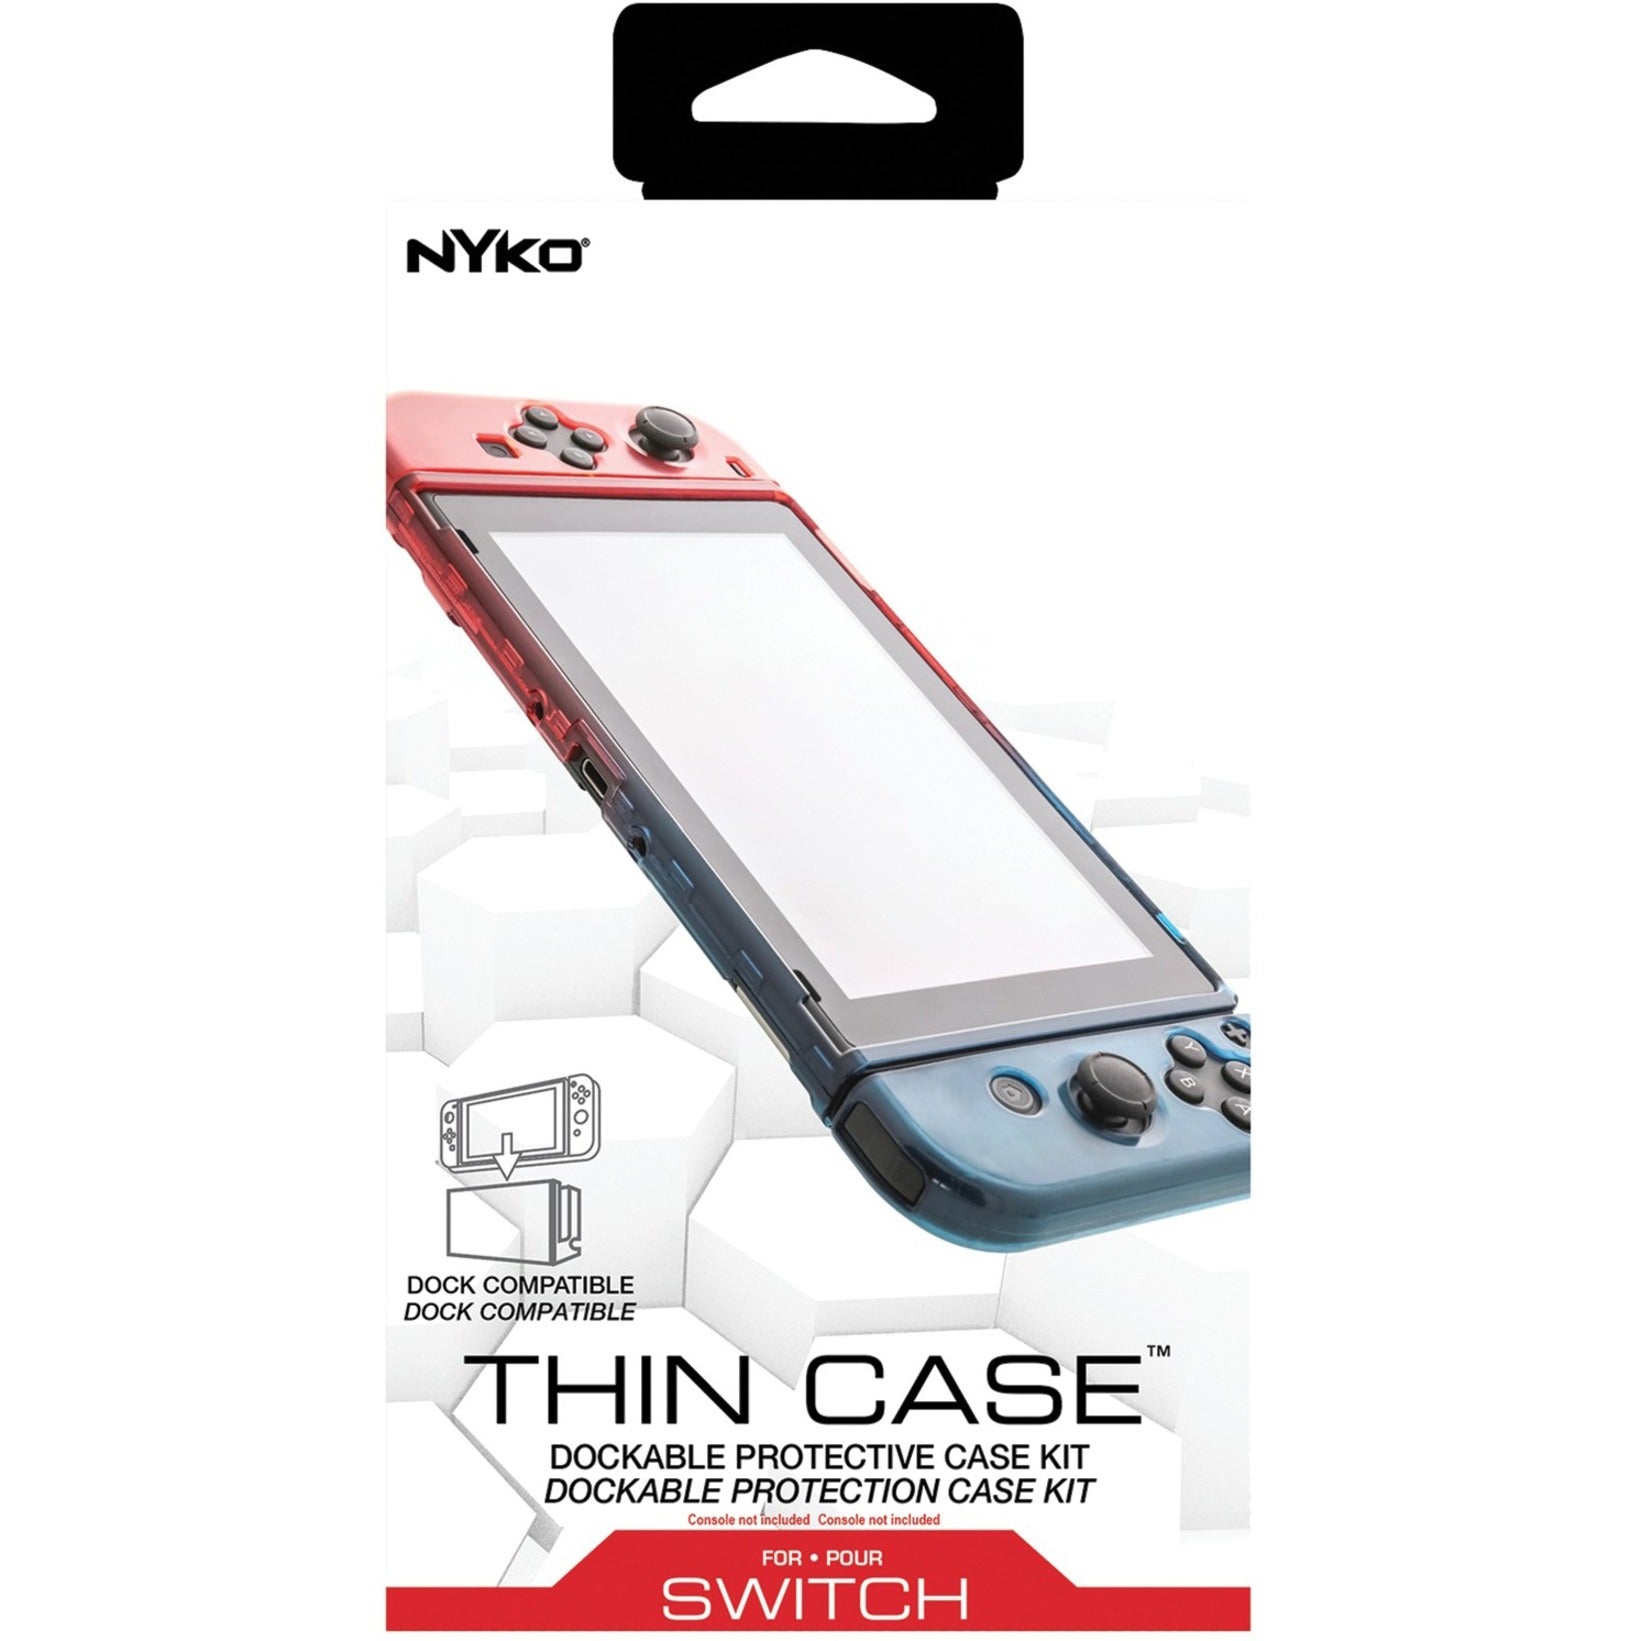 Nyko 87232 Thin Case for Nintendo Switch, Portable Gaming Console Protection